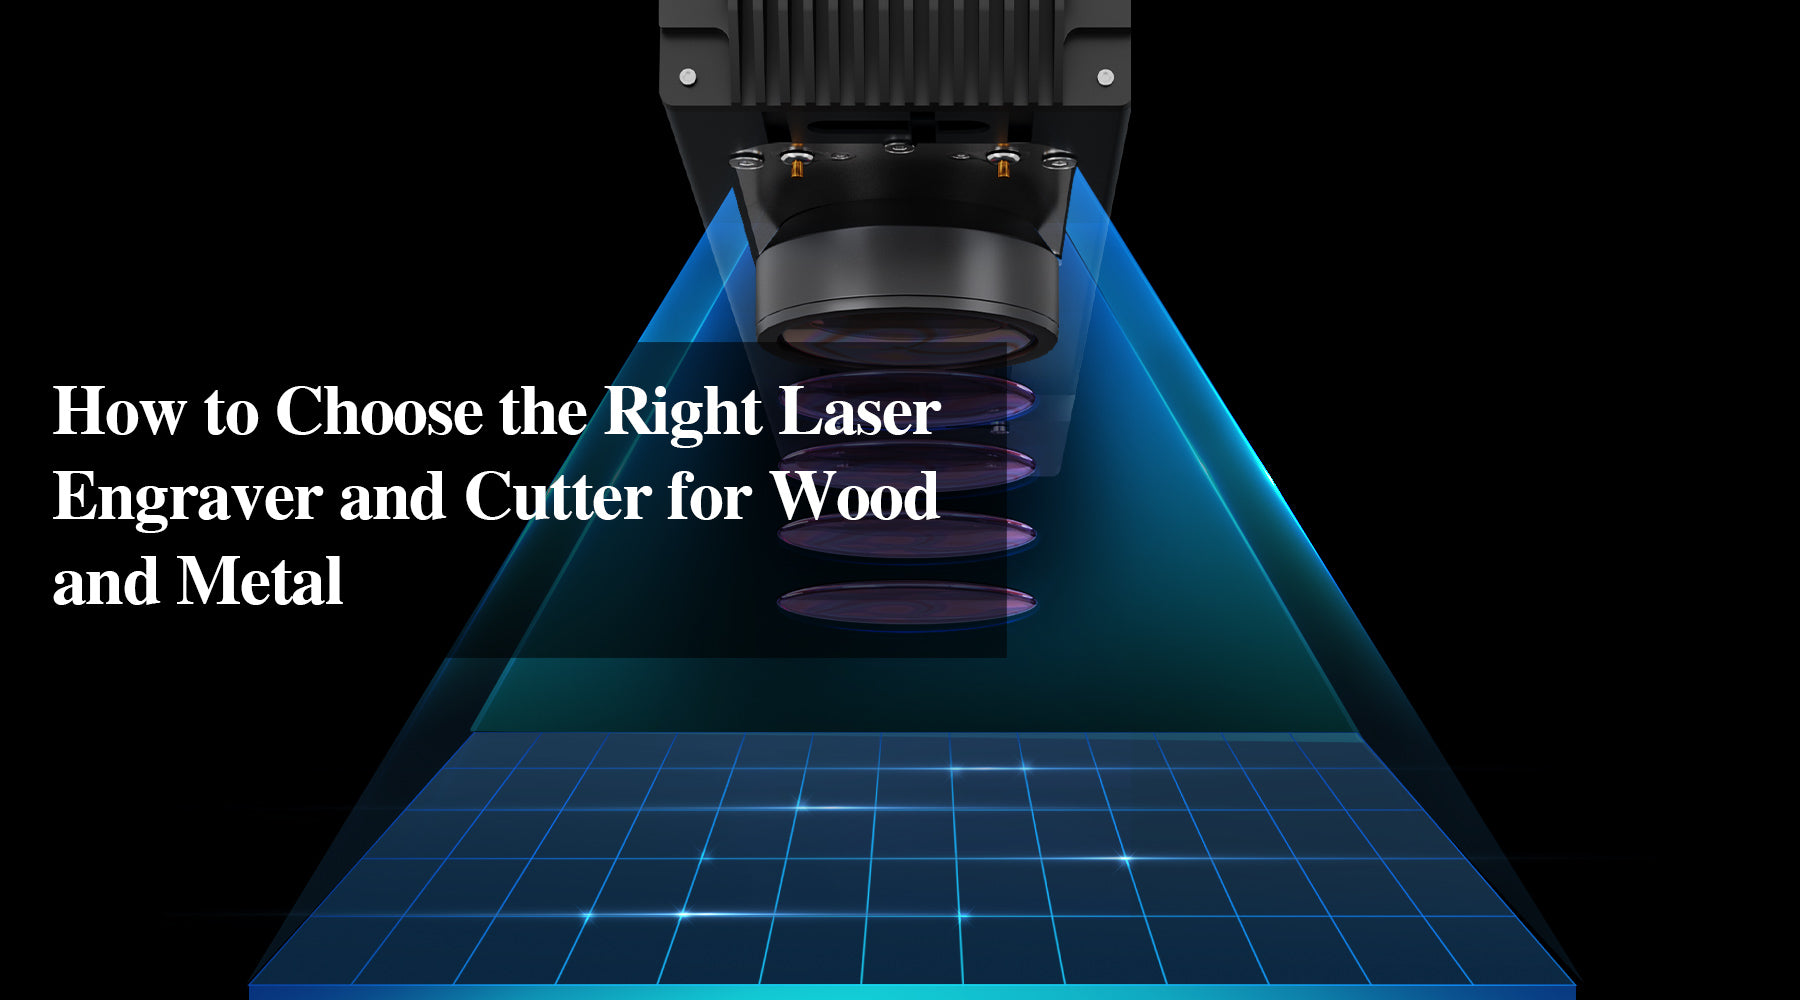 How to Choose the Right Laser Engraver and Cutter for Wood and Metal